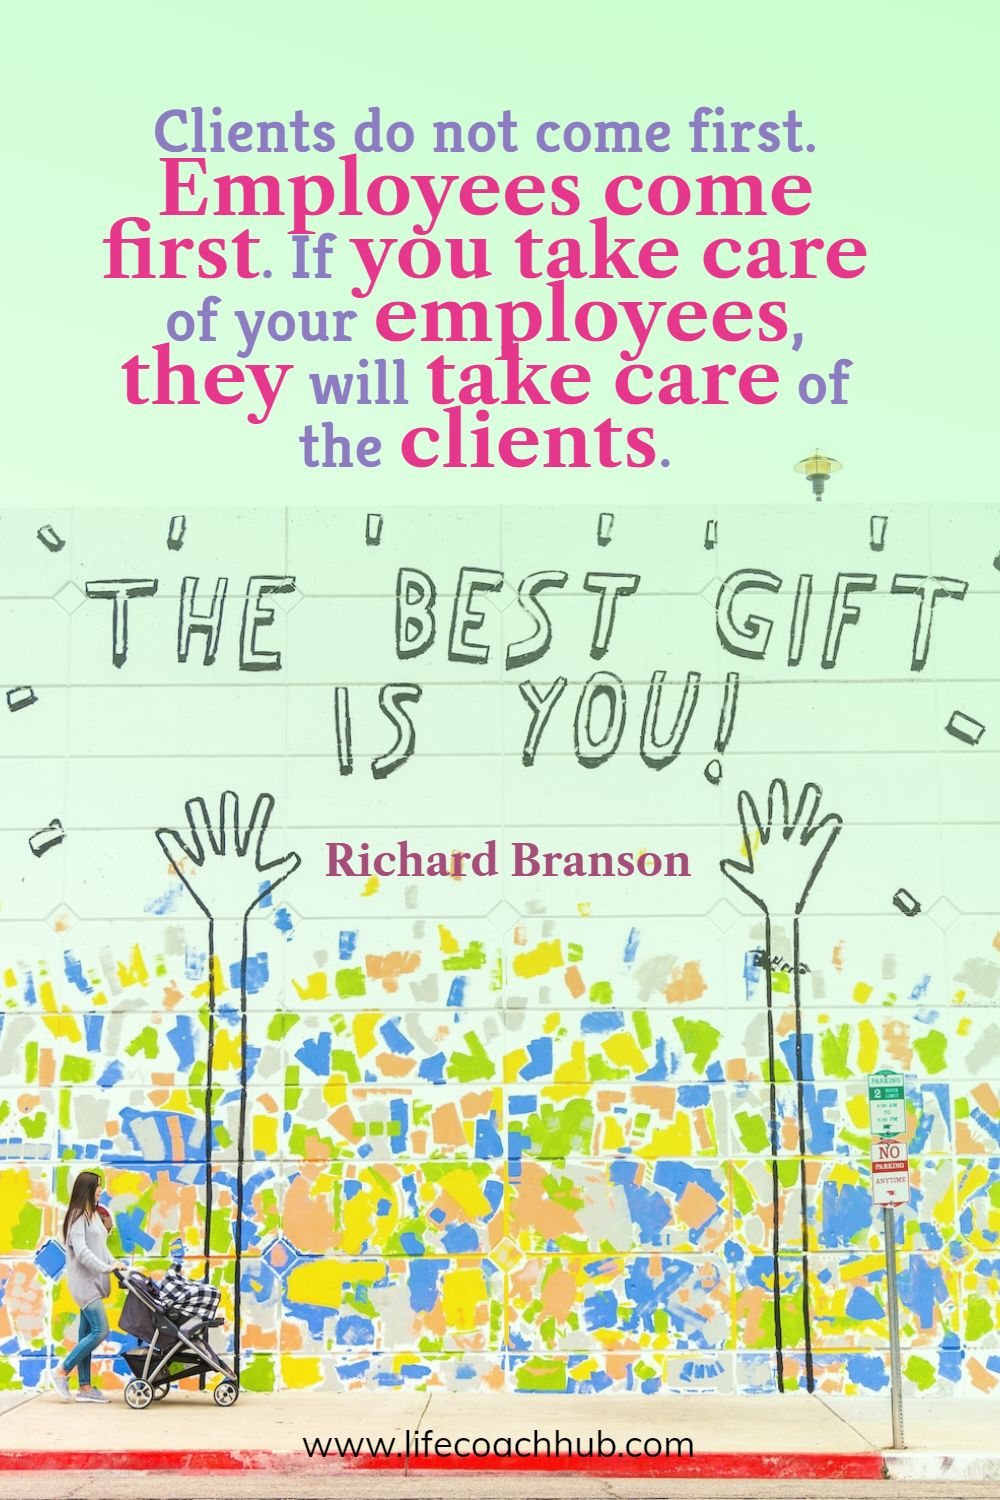 Clients do not come first. Employees come first. If you take care of your employees, they will take care of the clients. Richard Branson Coaching Quote